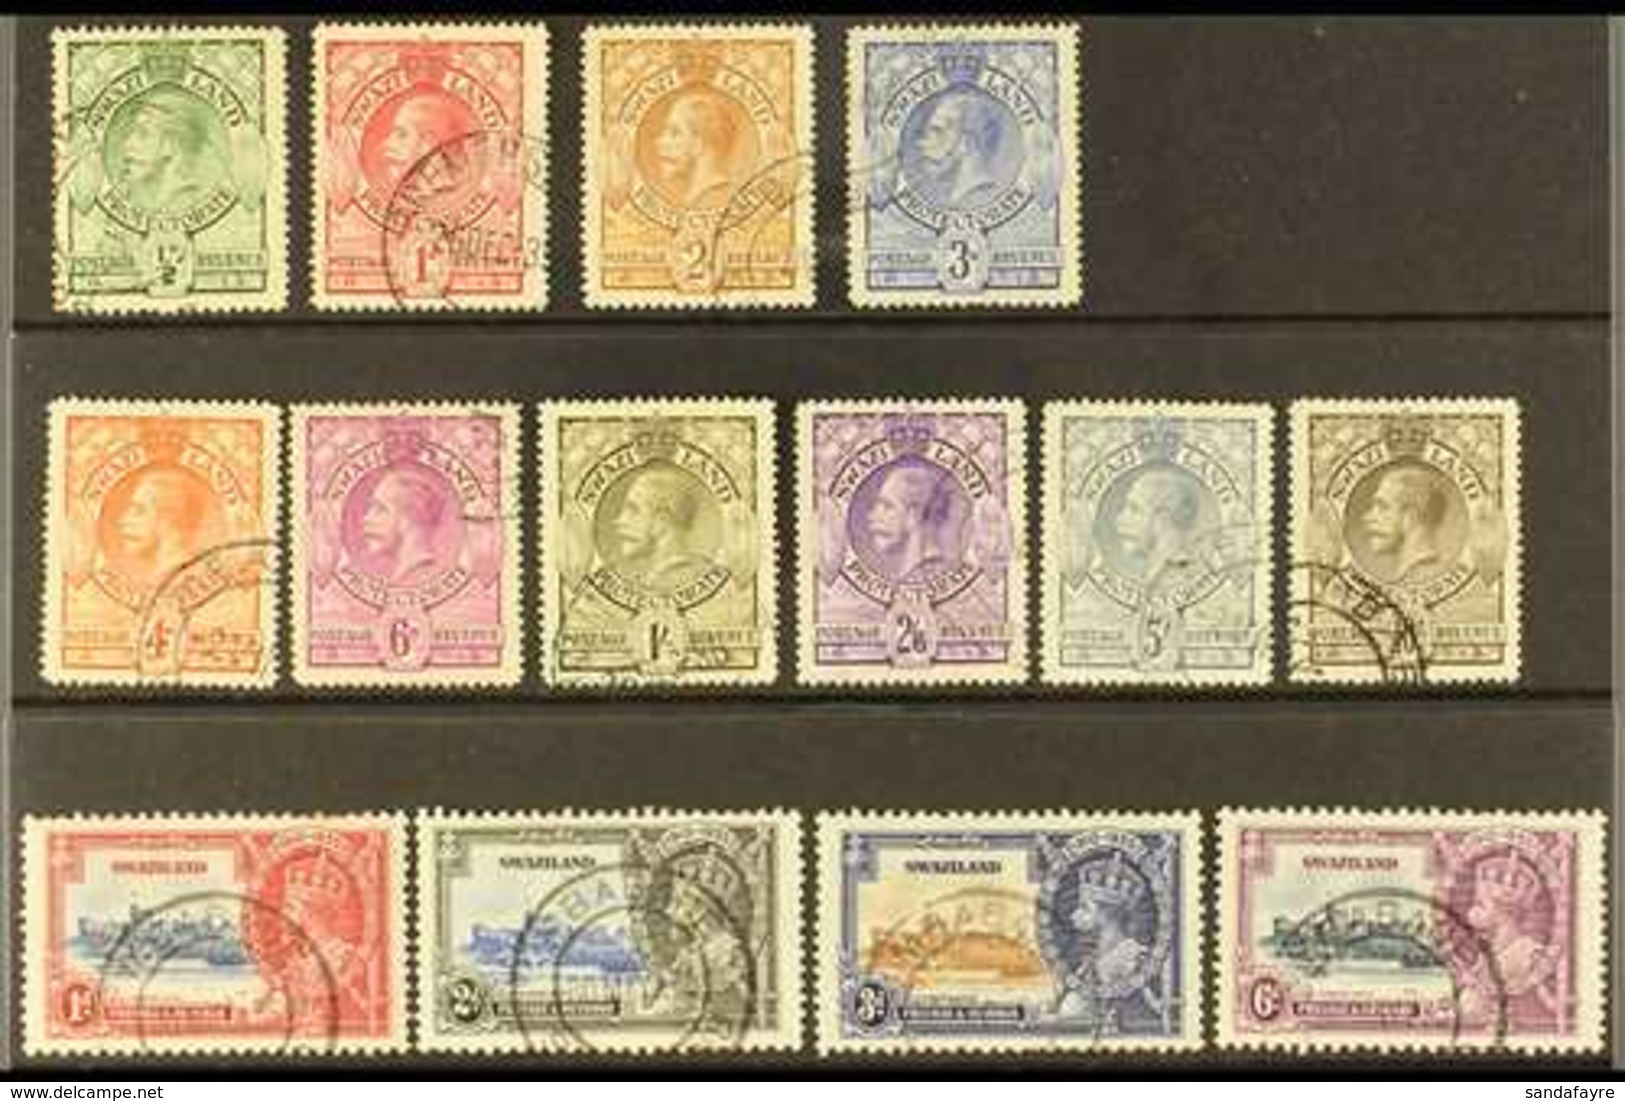 1933-36 COMPLETE USED KGV COLLECTION Presented On A Stock Card & Includes The 1933 Portrait Set & 1935 Jubilee Set, SG 1 - Swaziland (...-1967)